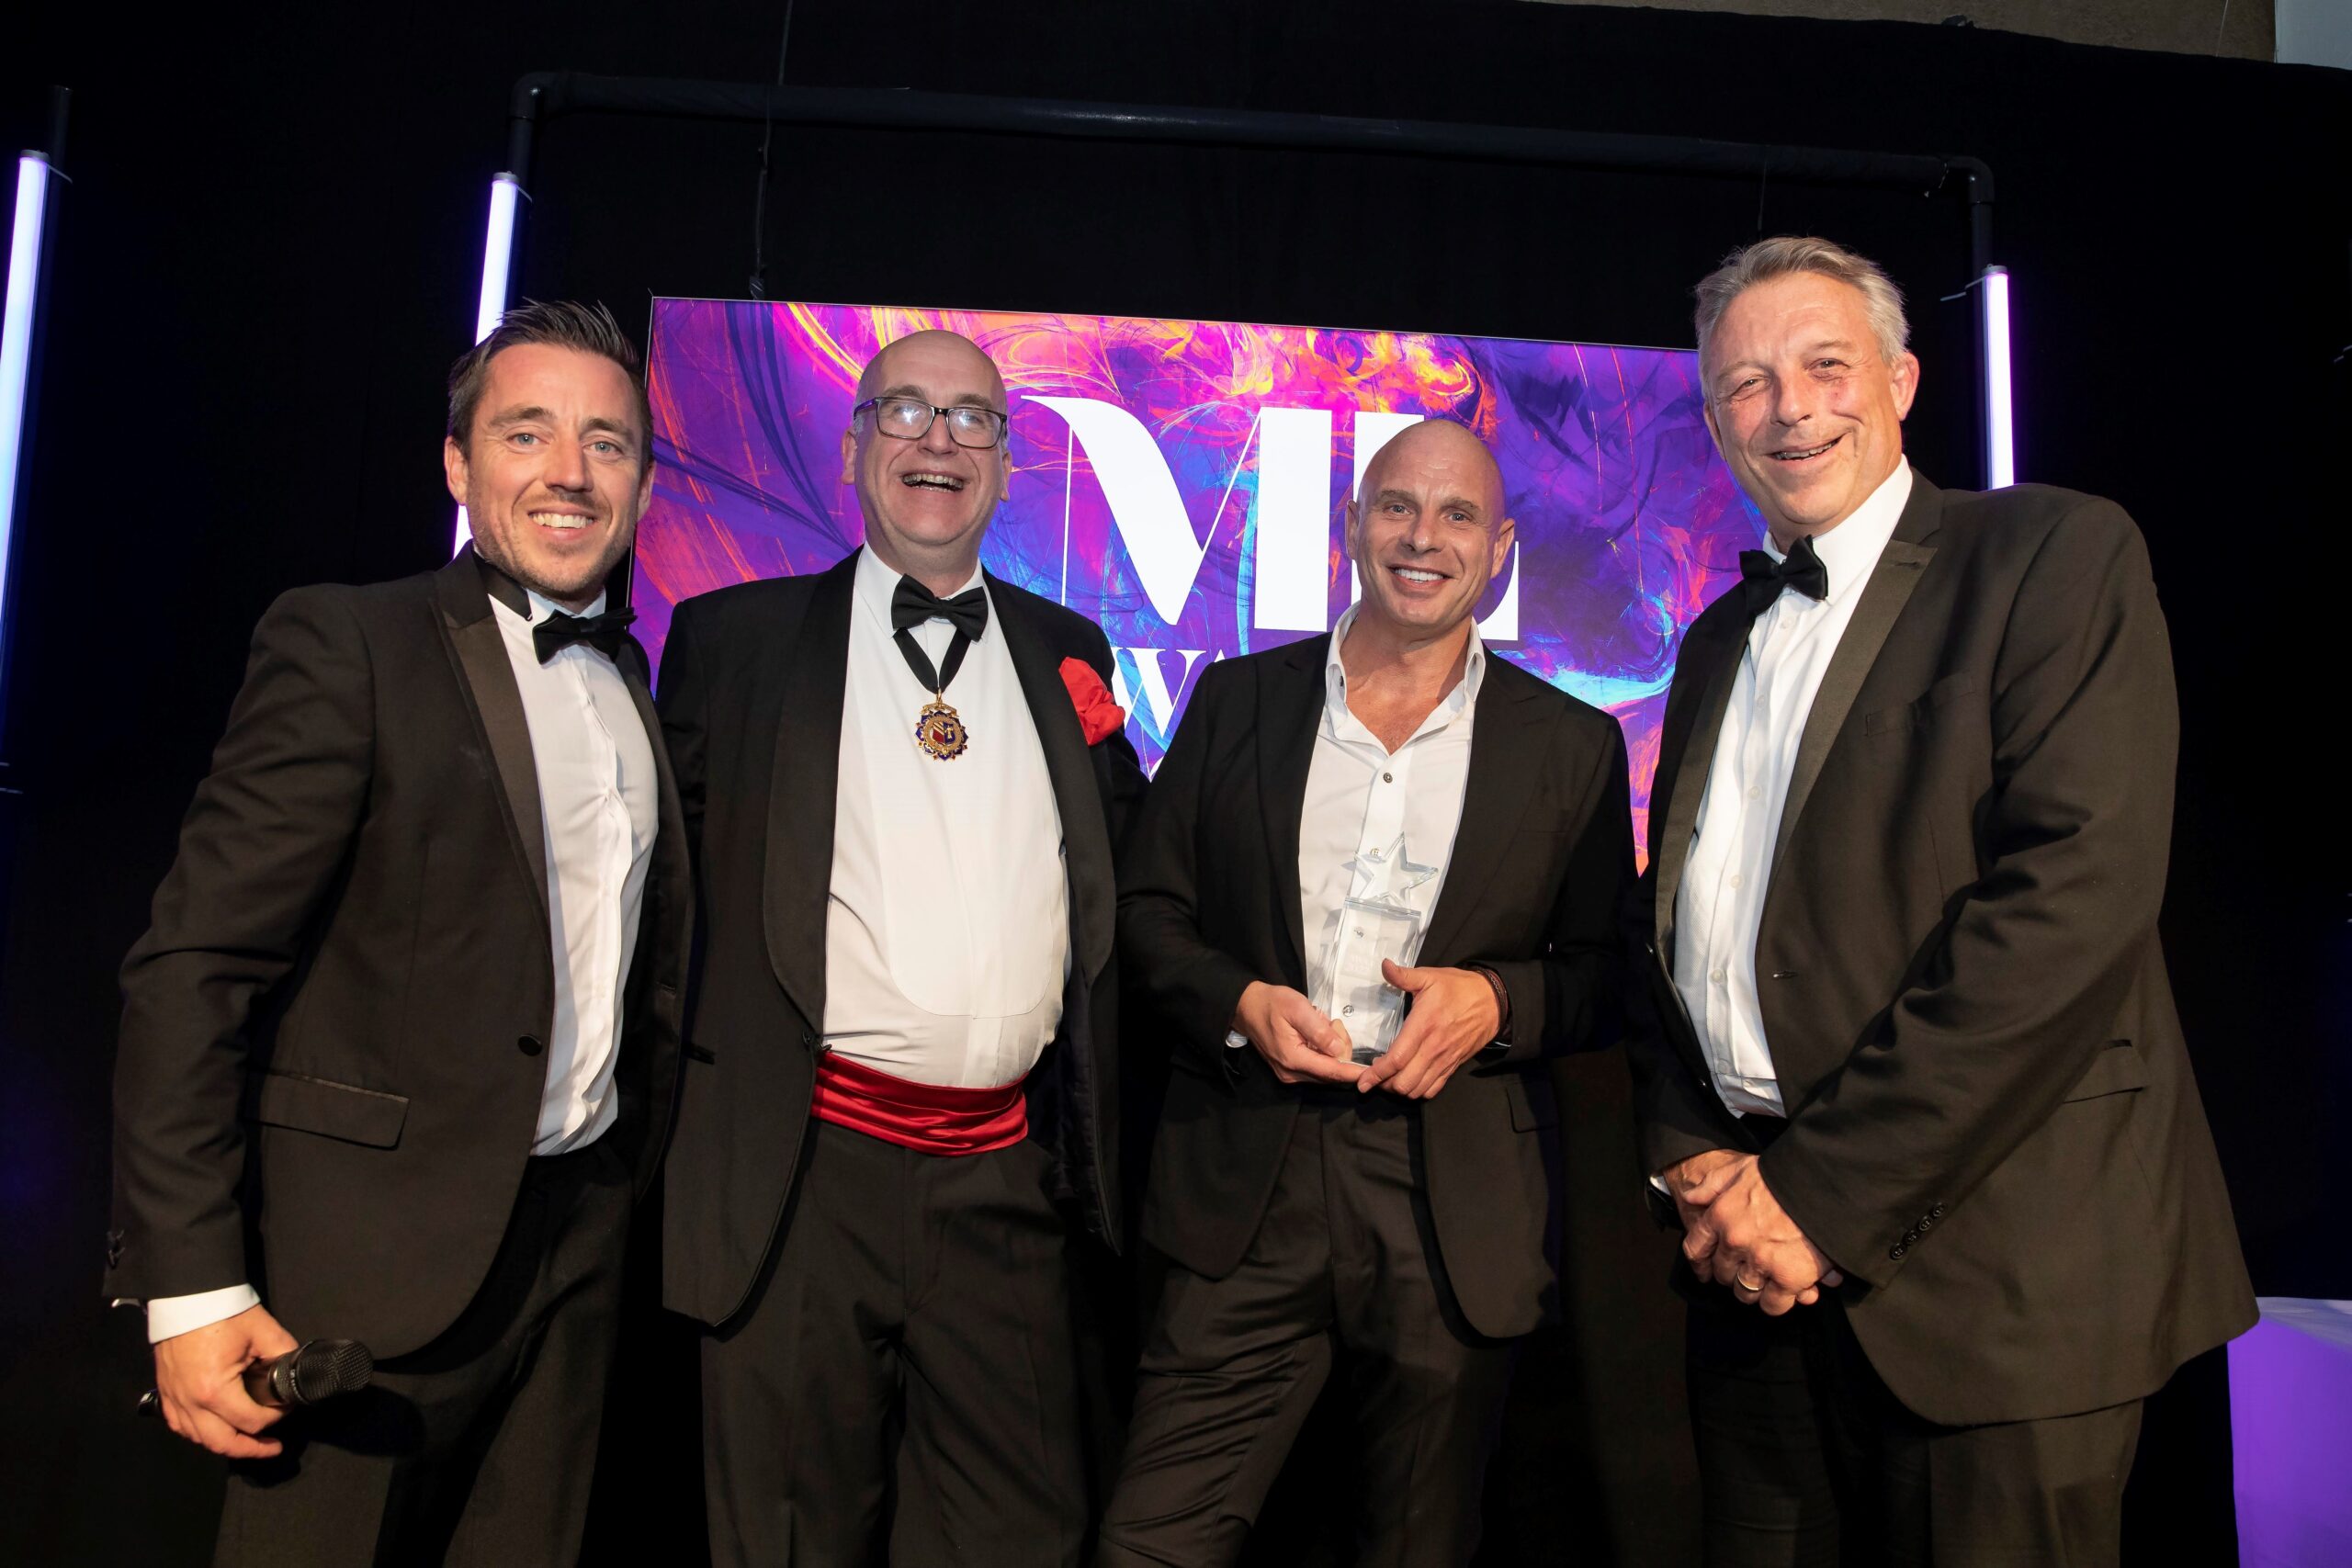 Triumph for Beyond Law Group at the Manchester Legal Awards